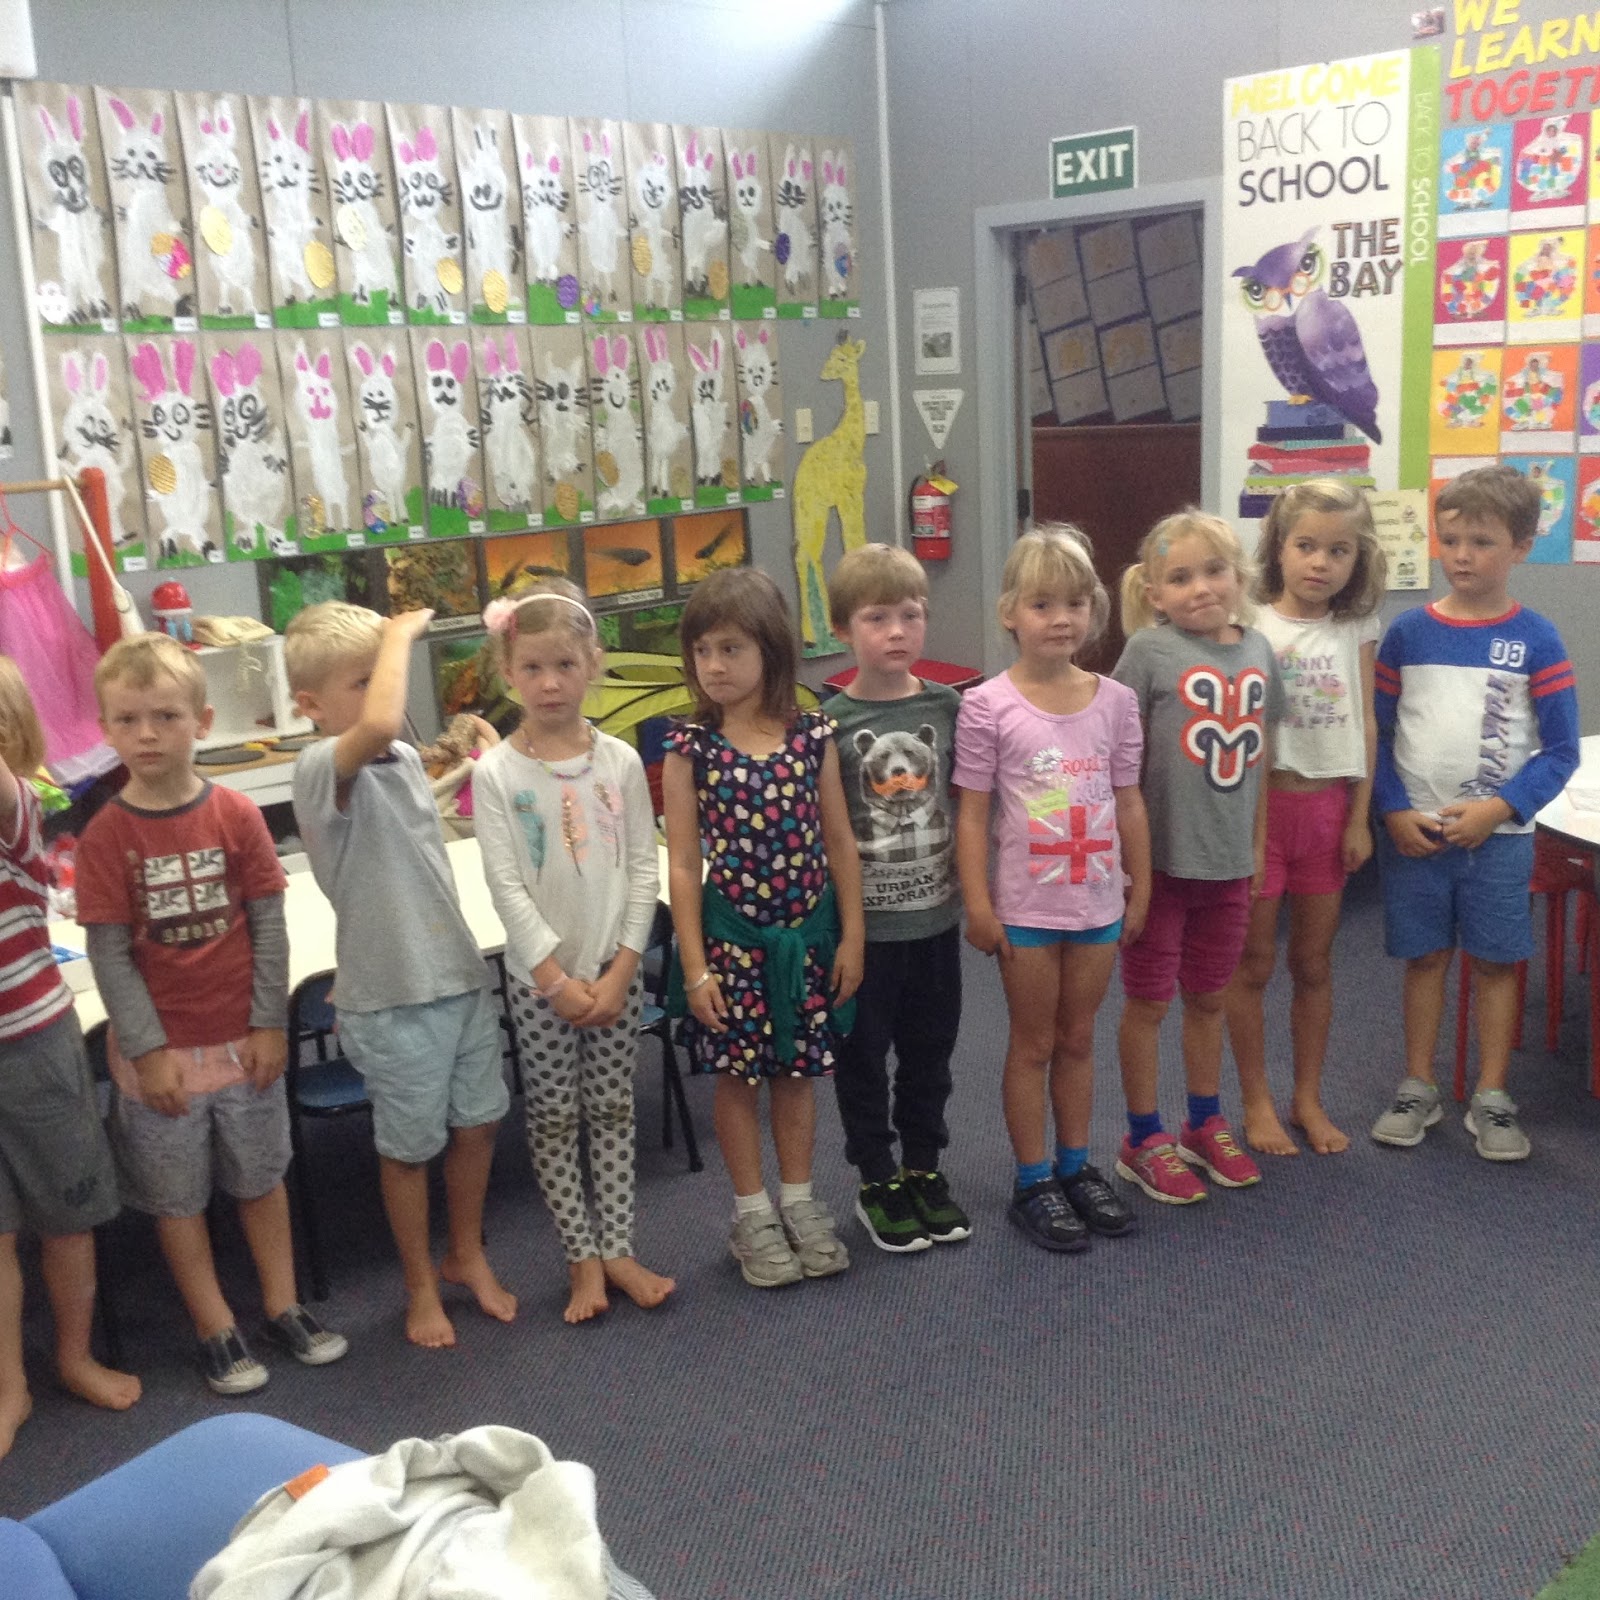 Tay Team Website: Bay Kids Learning To Measure Themselves: Tallest to Shortest1600 x 1600